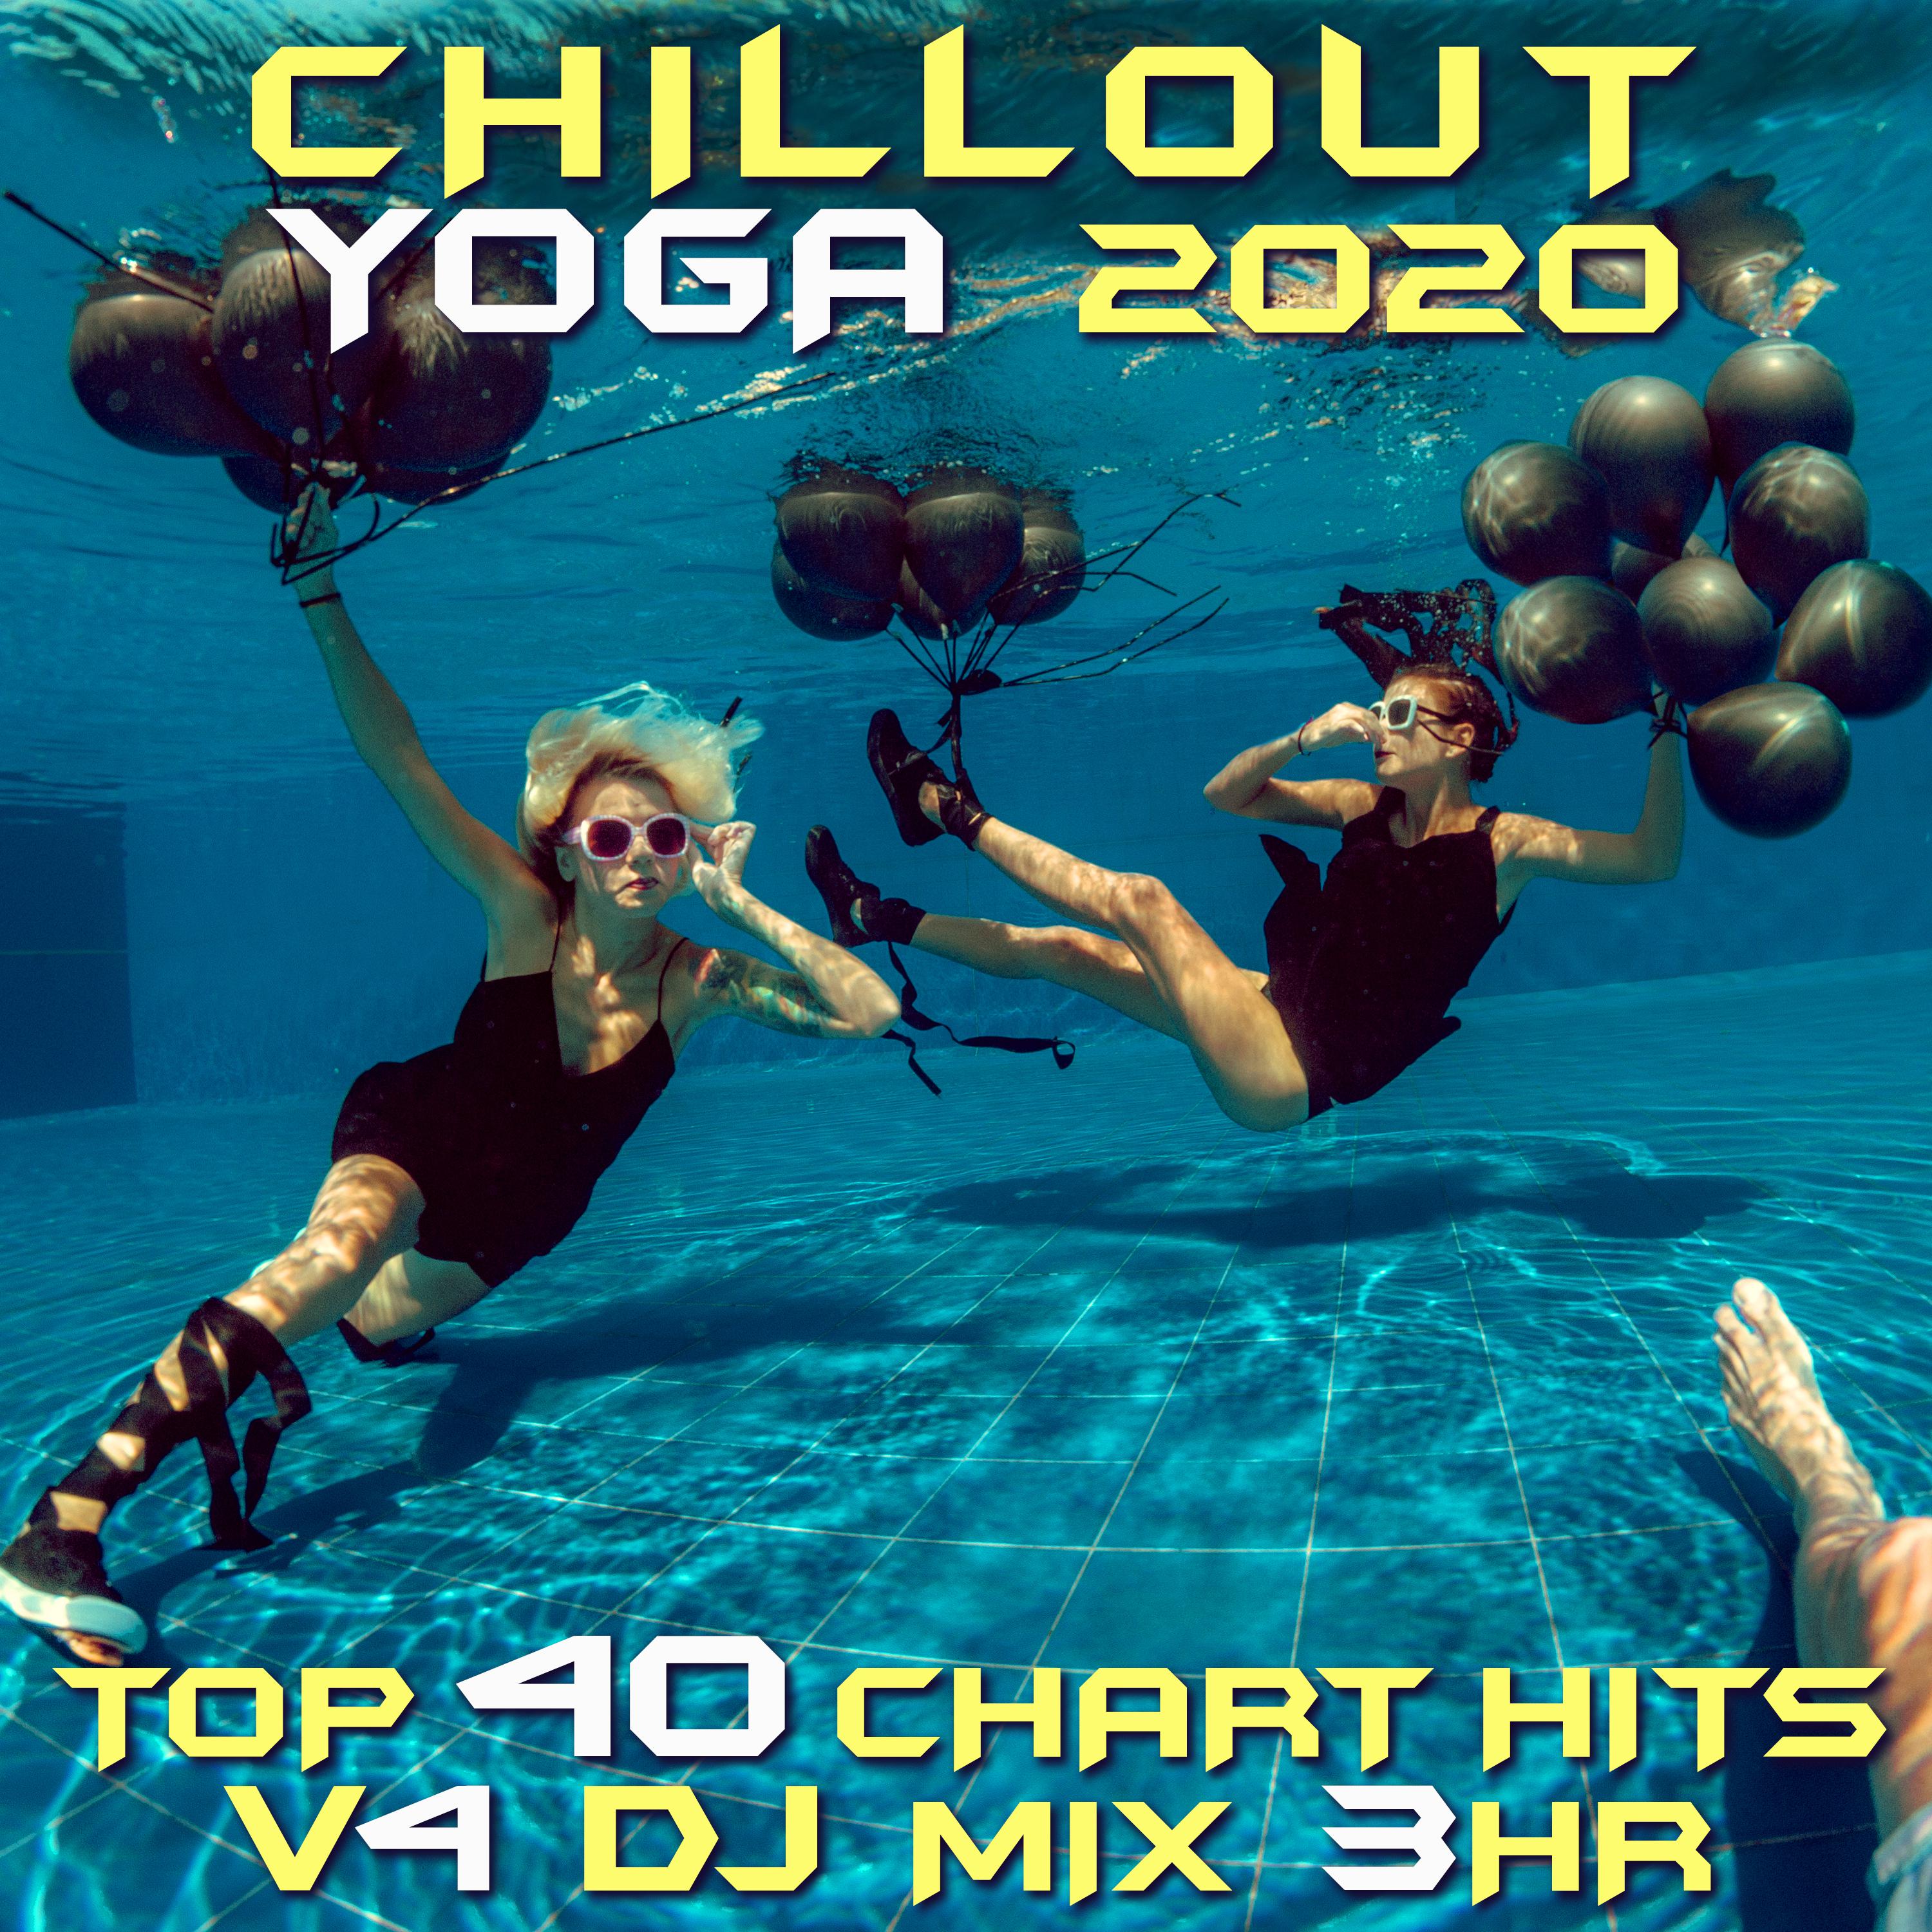 Ascent - Melody Through Time (Chill Out Yoga 2020, Vol. 4 Dj Mixed)